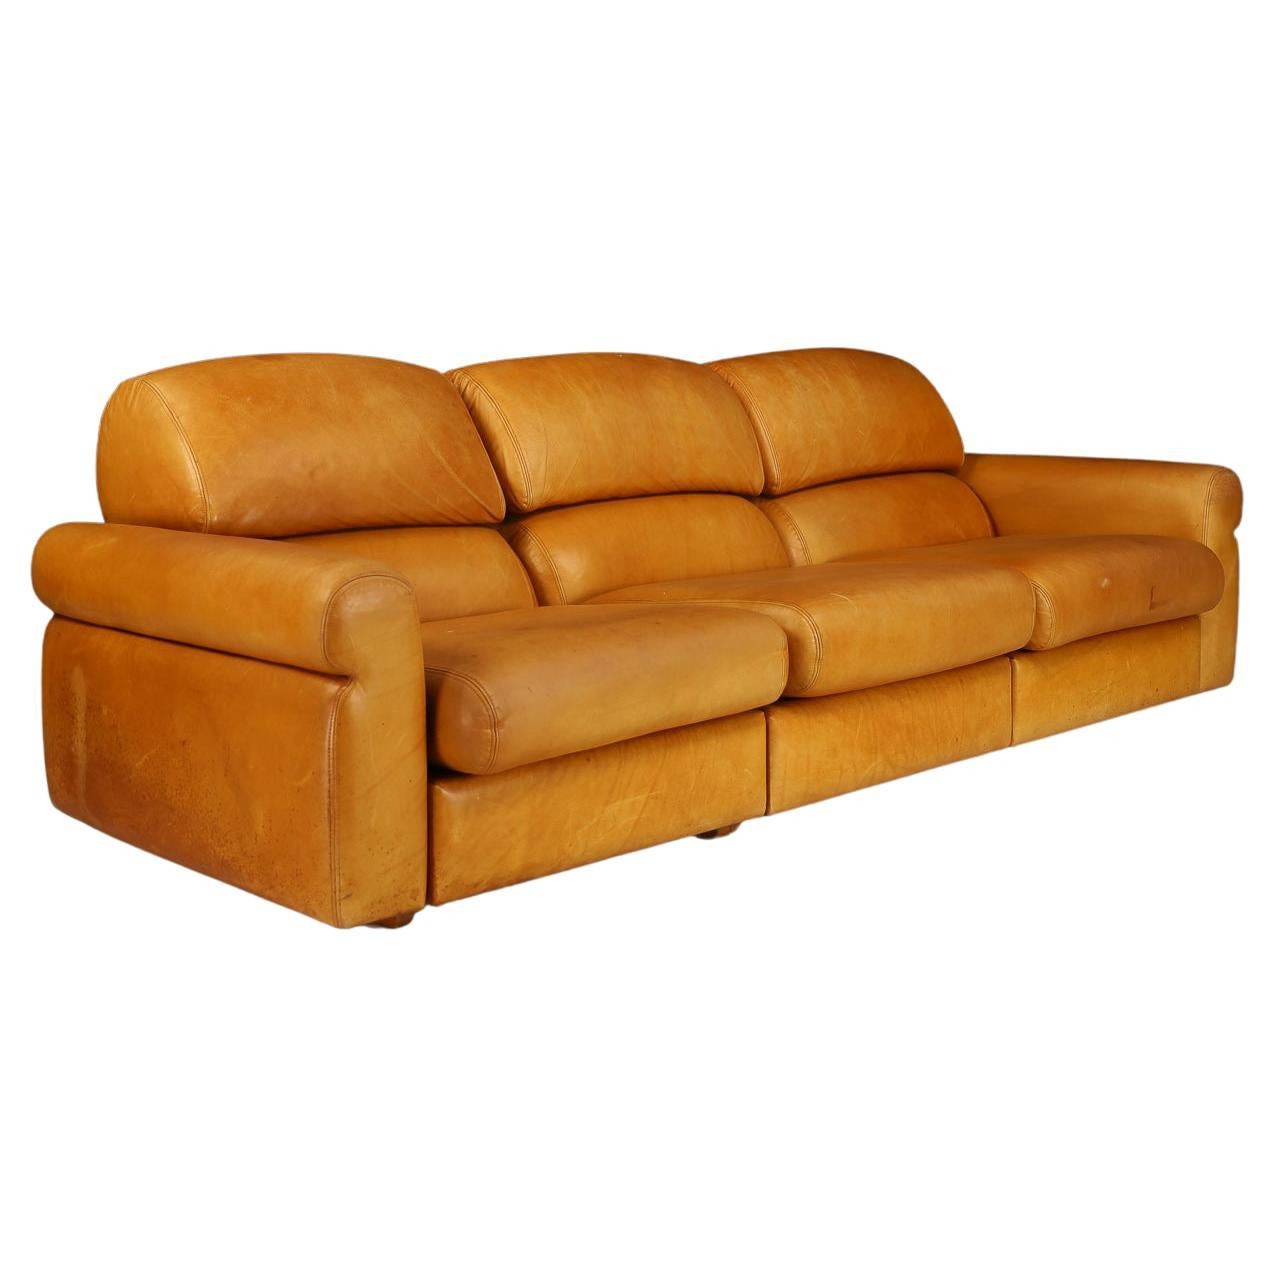 Large Mid-Century Modern Lounge Sofa in Cognac Leather, Italy 1960s